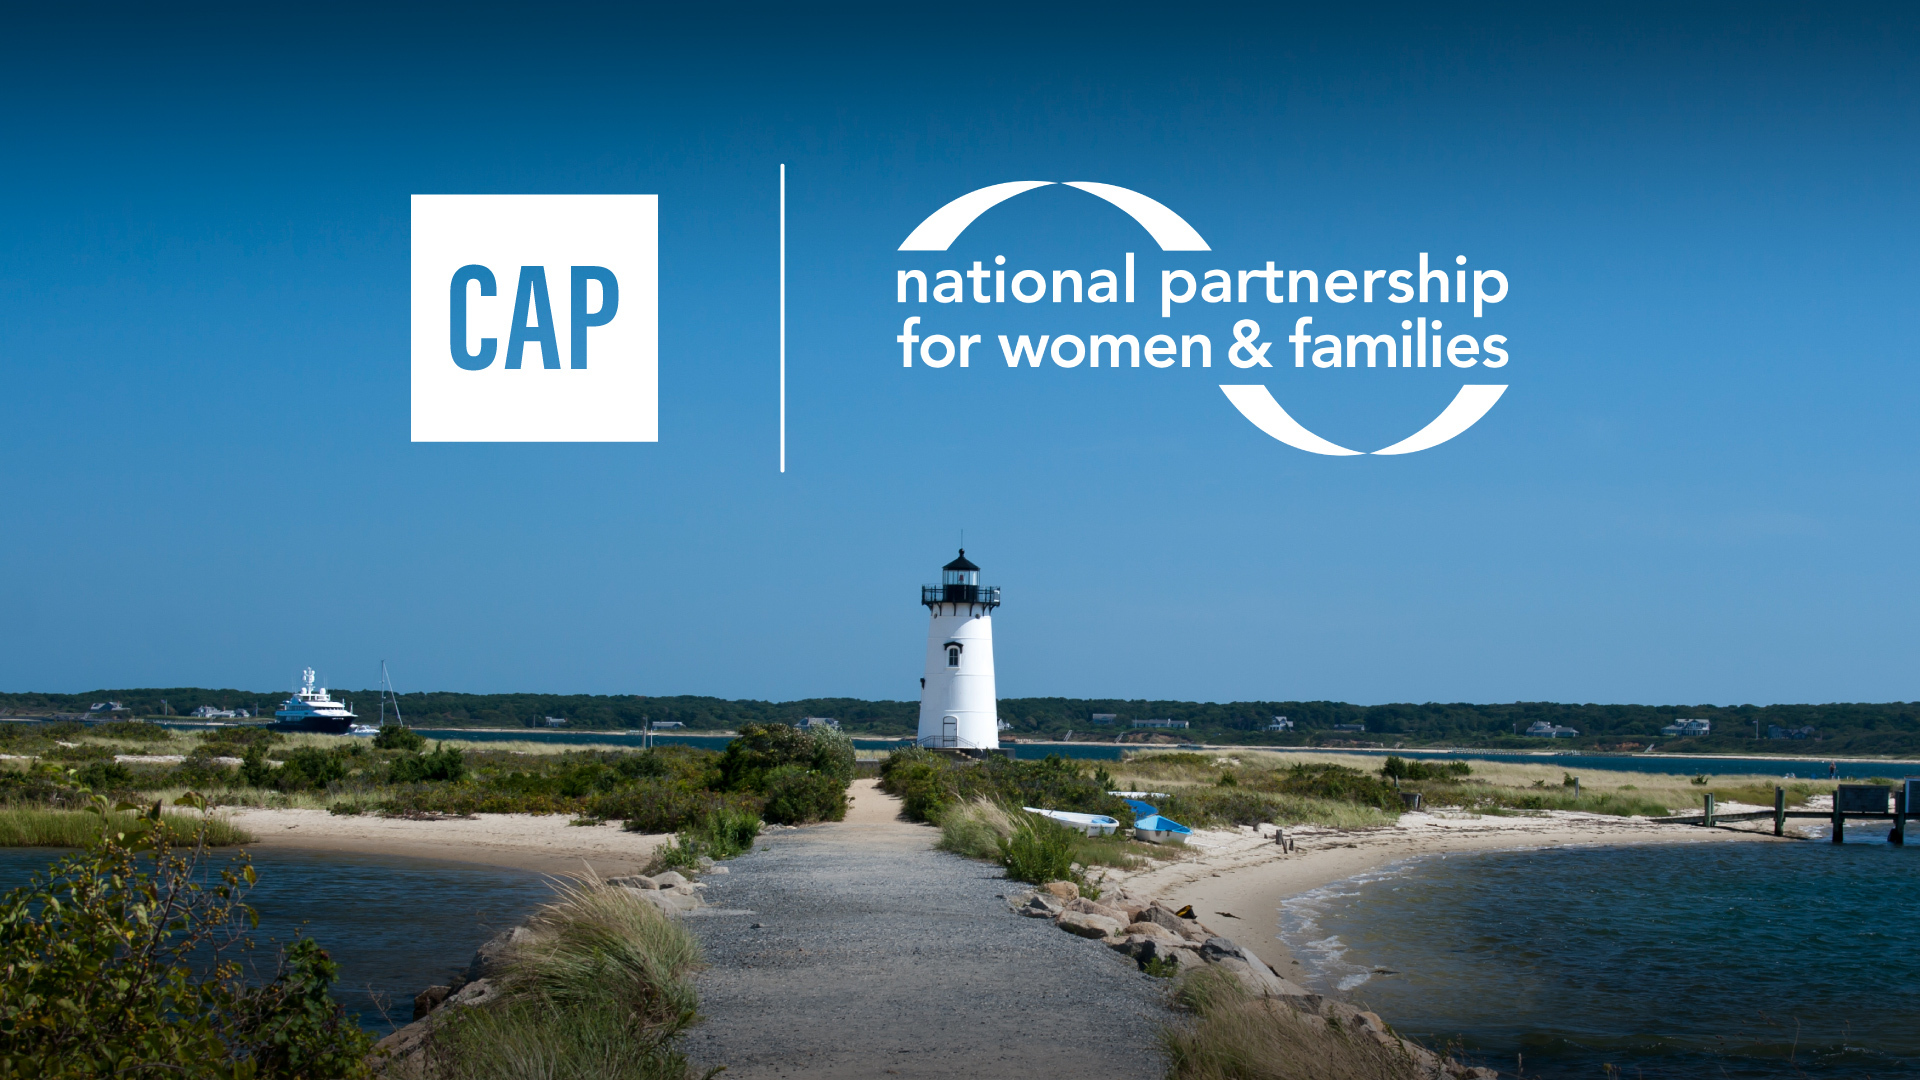 Logos of CAP and NPWF over an image of a lighthouse.